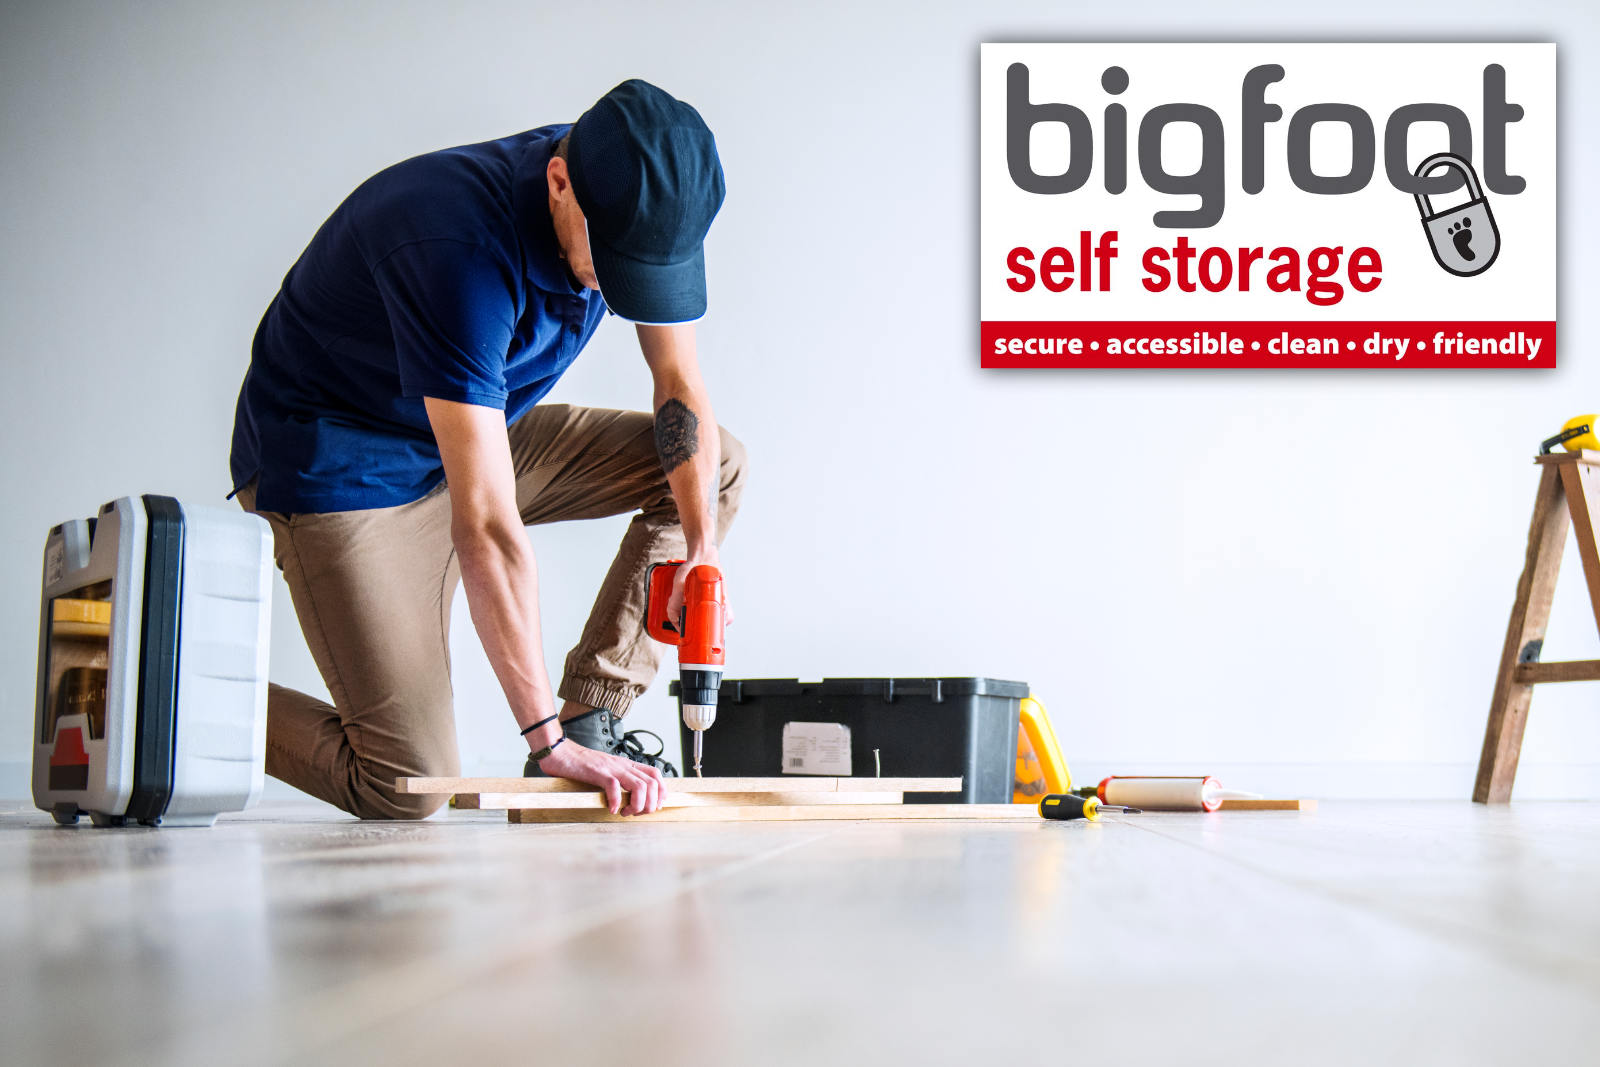 Self storage for home renovations